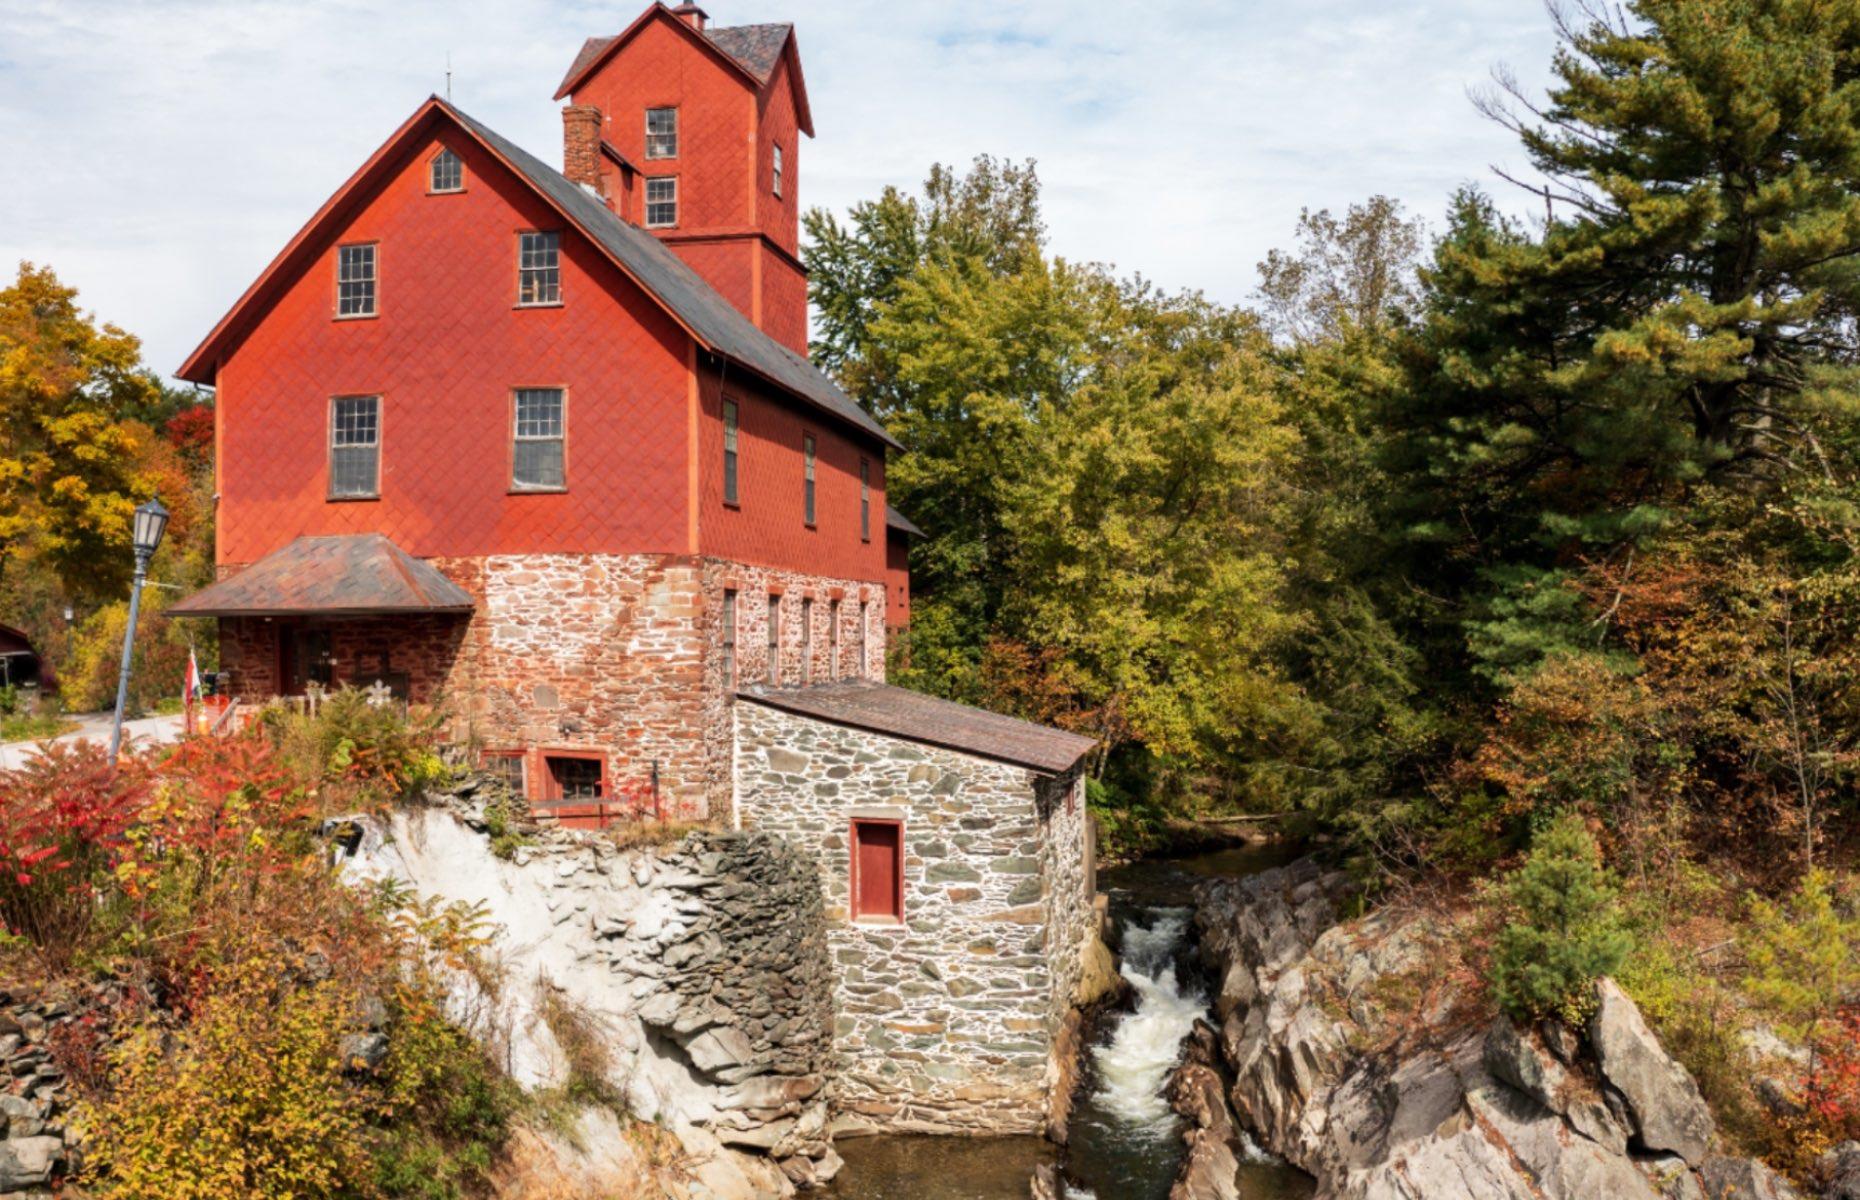 It’s worth visiting Jericho just to see its gorgeous old red stone mill perched precipitously over a rocky gorge (it's now the base for the Jericho Historical Society). Be sure to check out the Jericho Center Country Store, too, which is one of the oldest of its kind in Vermont. Another highlight is Galusha House, former home of the namesake Vermont governor, which was built in 1790 and is listed on the USA's National Register of Historic Places.